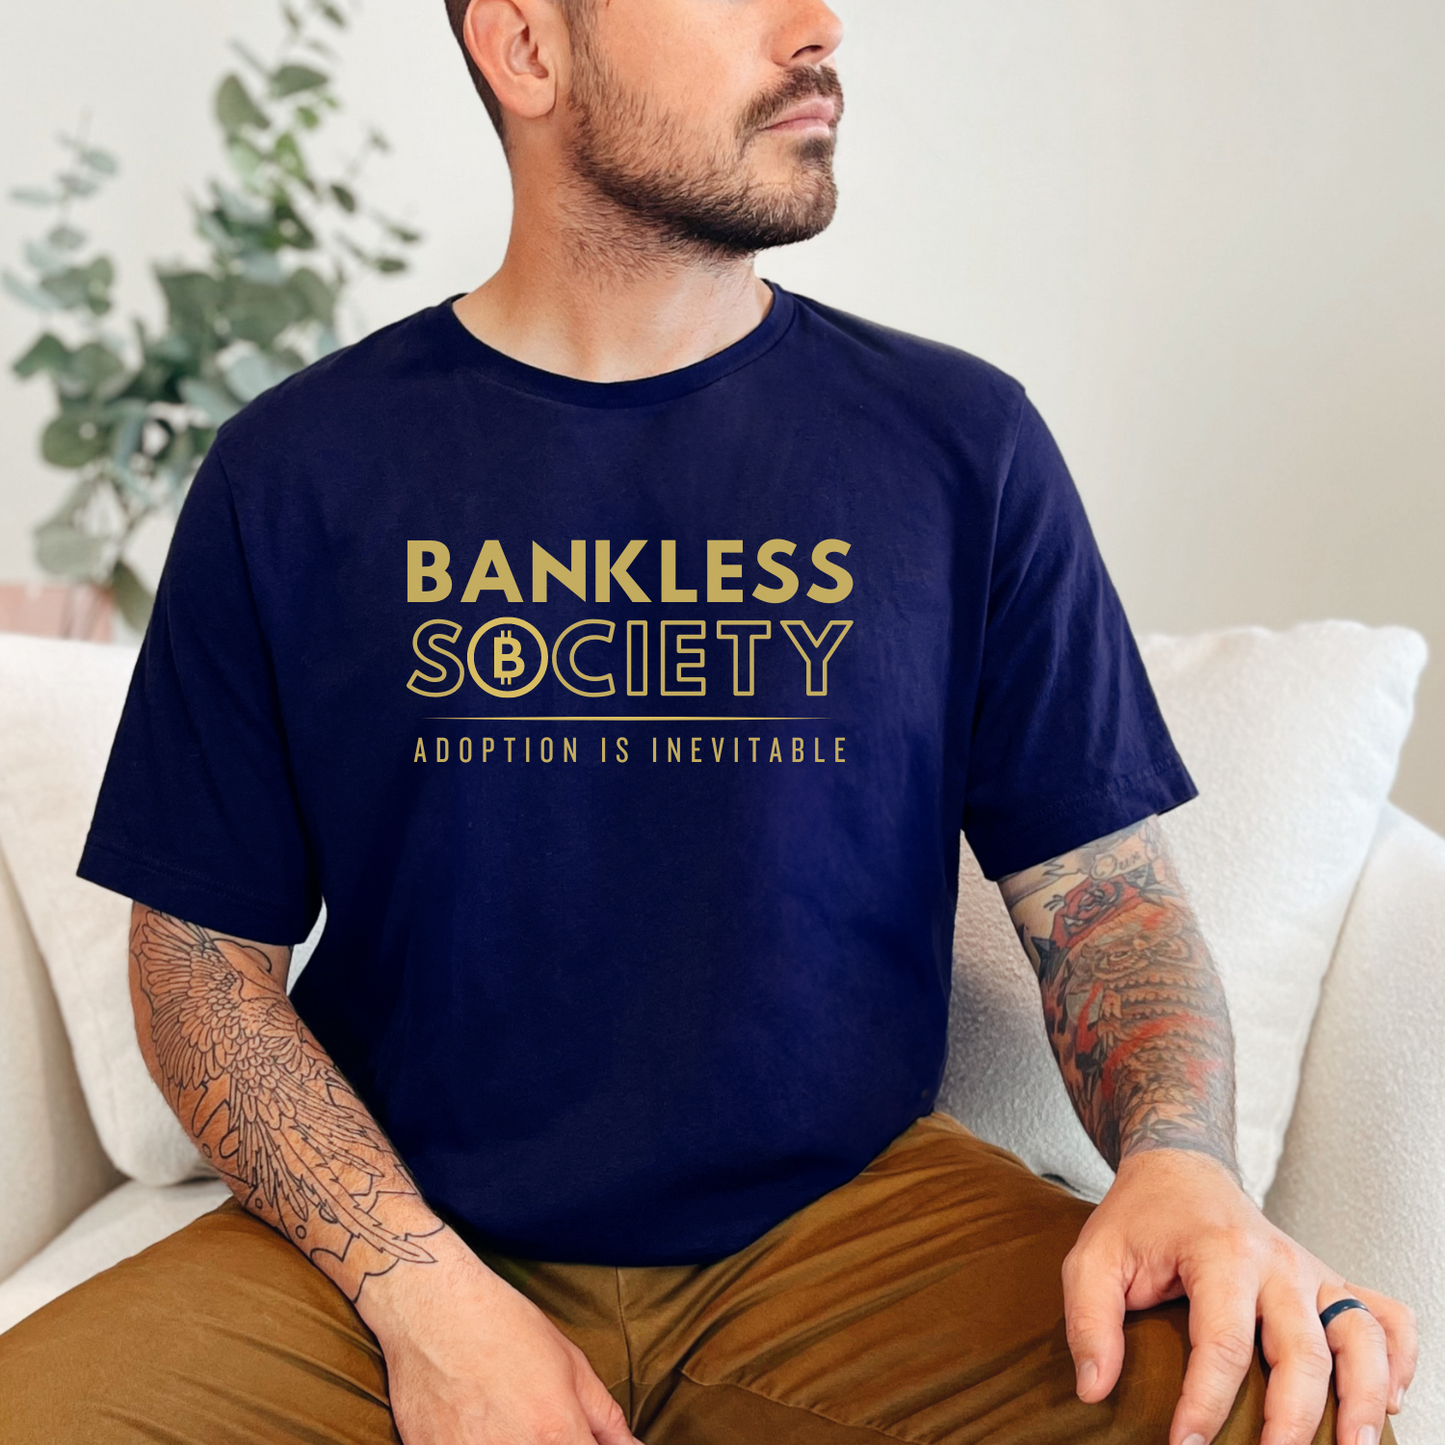 Navy BC 3001 tee, fashion for the future, where we live in a global bankless society.